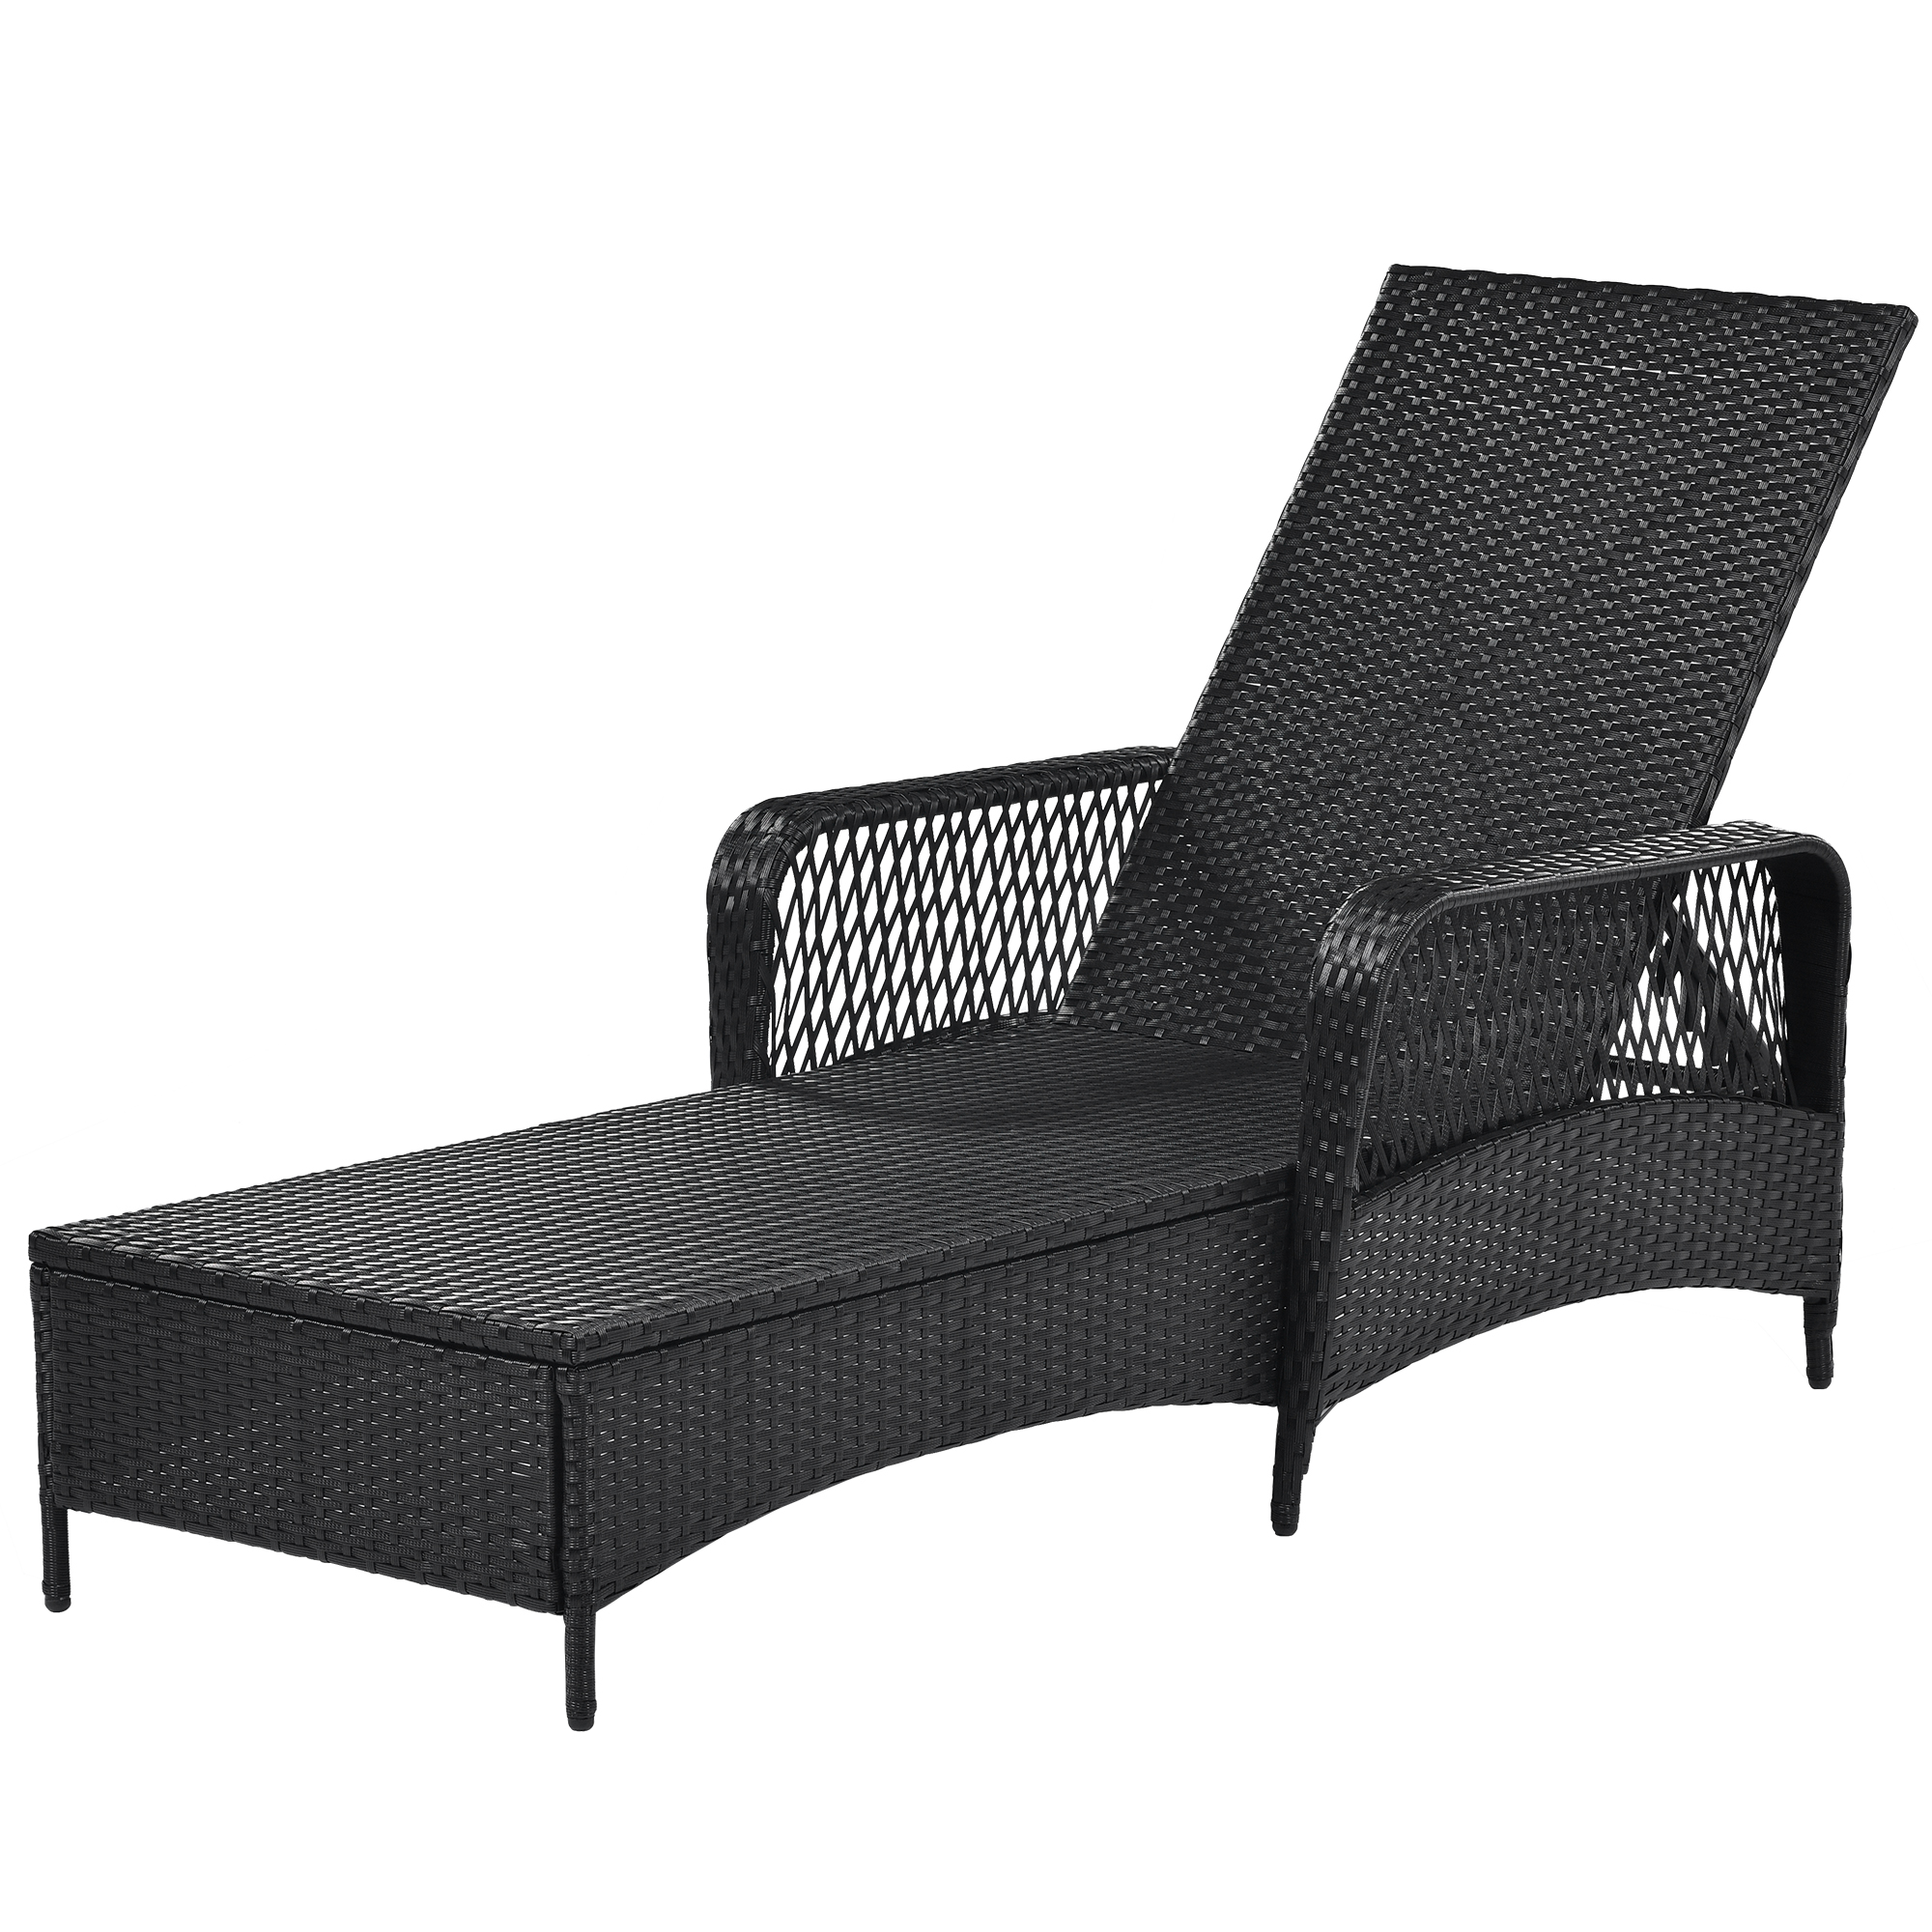 PE Rattan Chaise Lounge Set, 1 Set Patio Chaise Lounge, Sun Lounger for Outside, Adjustable Backrest Recliners with Cushions, Rattan Reclining Chair Furniture for Garden Beach Pool, Green - image 3 of 8